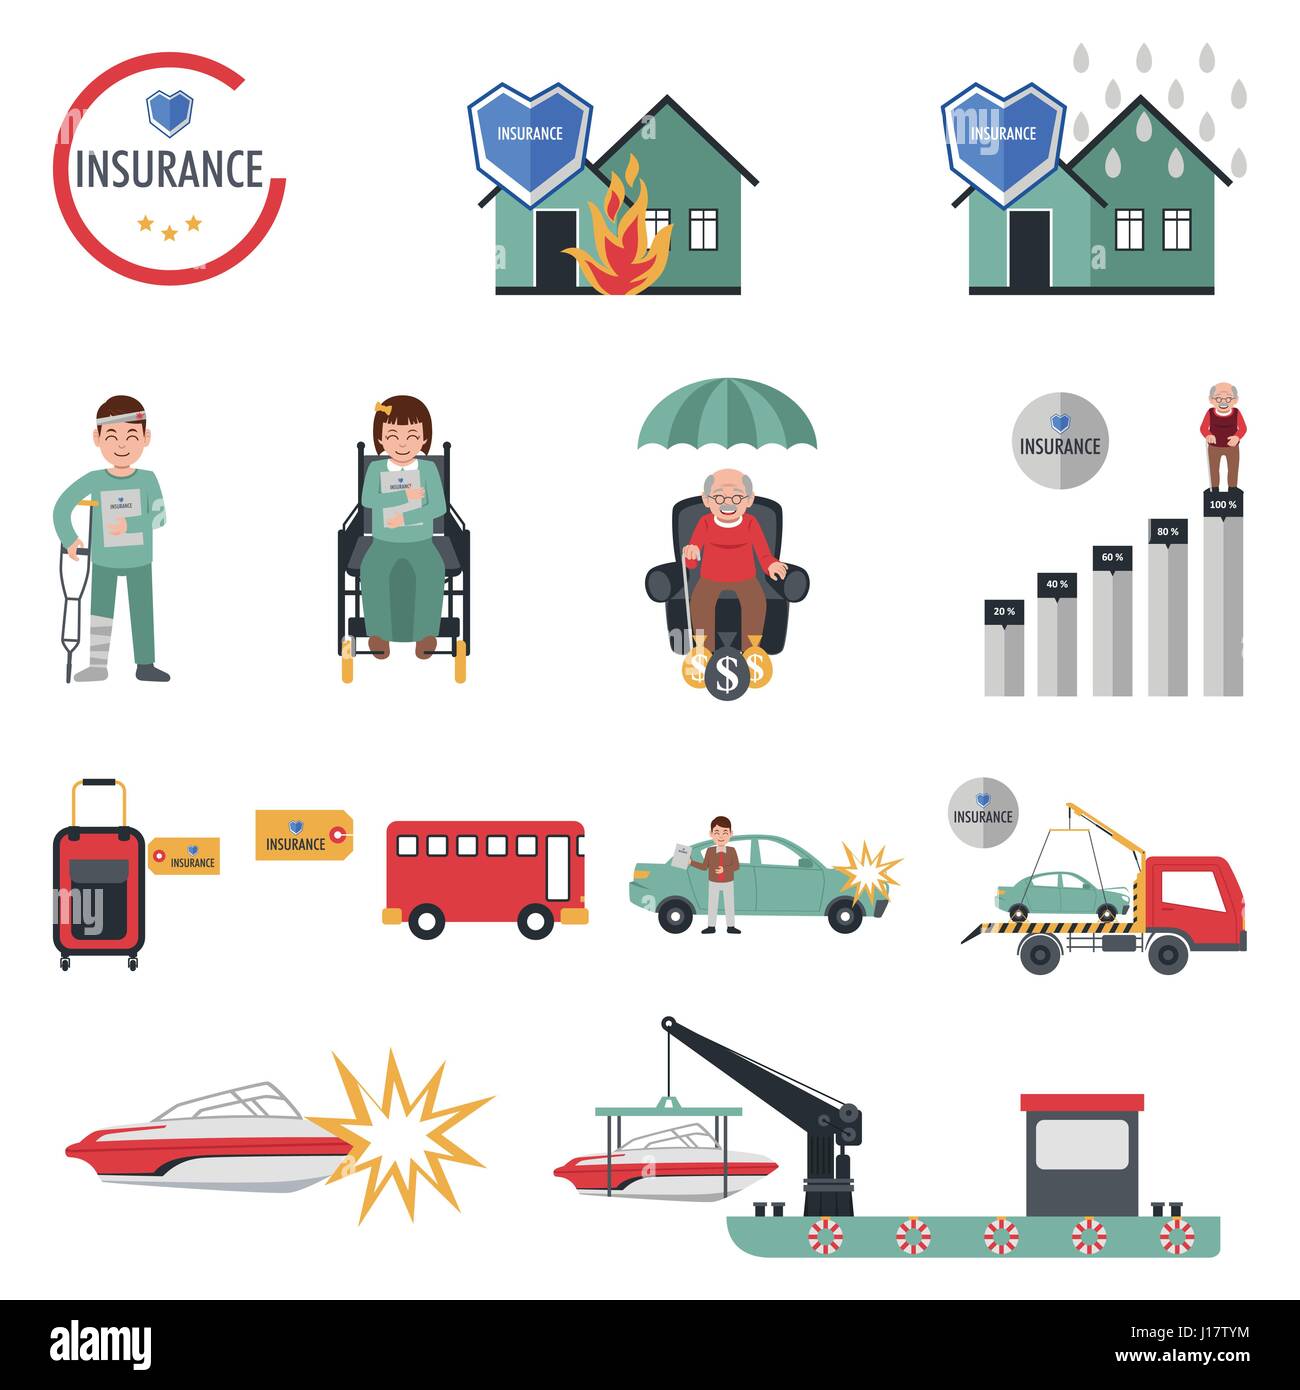 A vector illustration of insurance icon sets Stock Vector